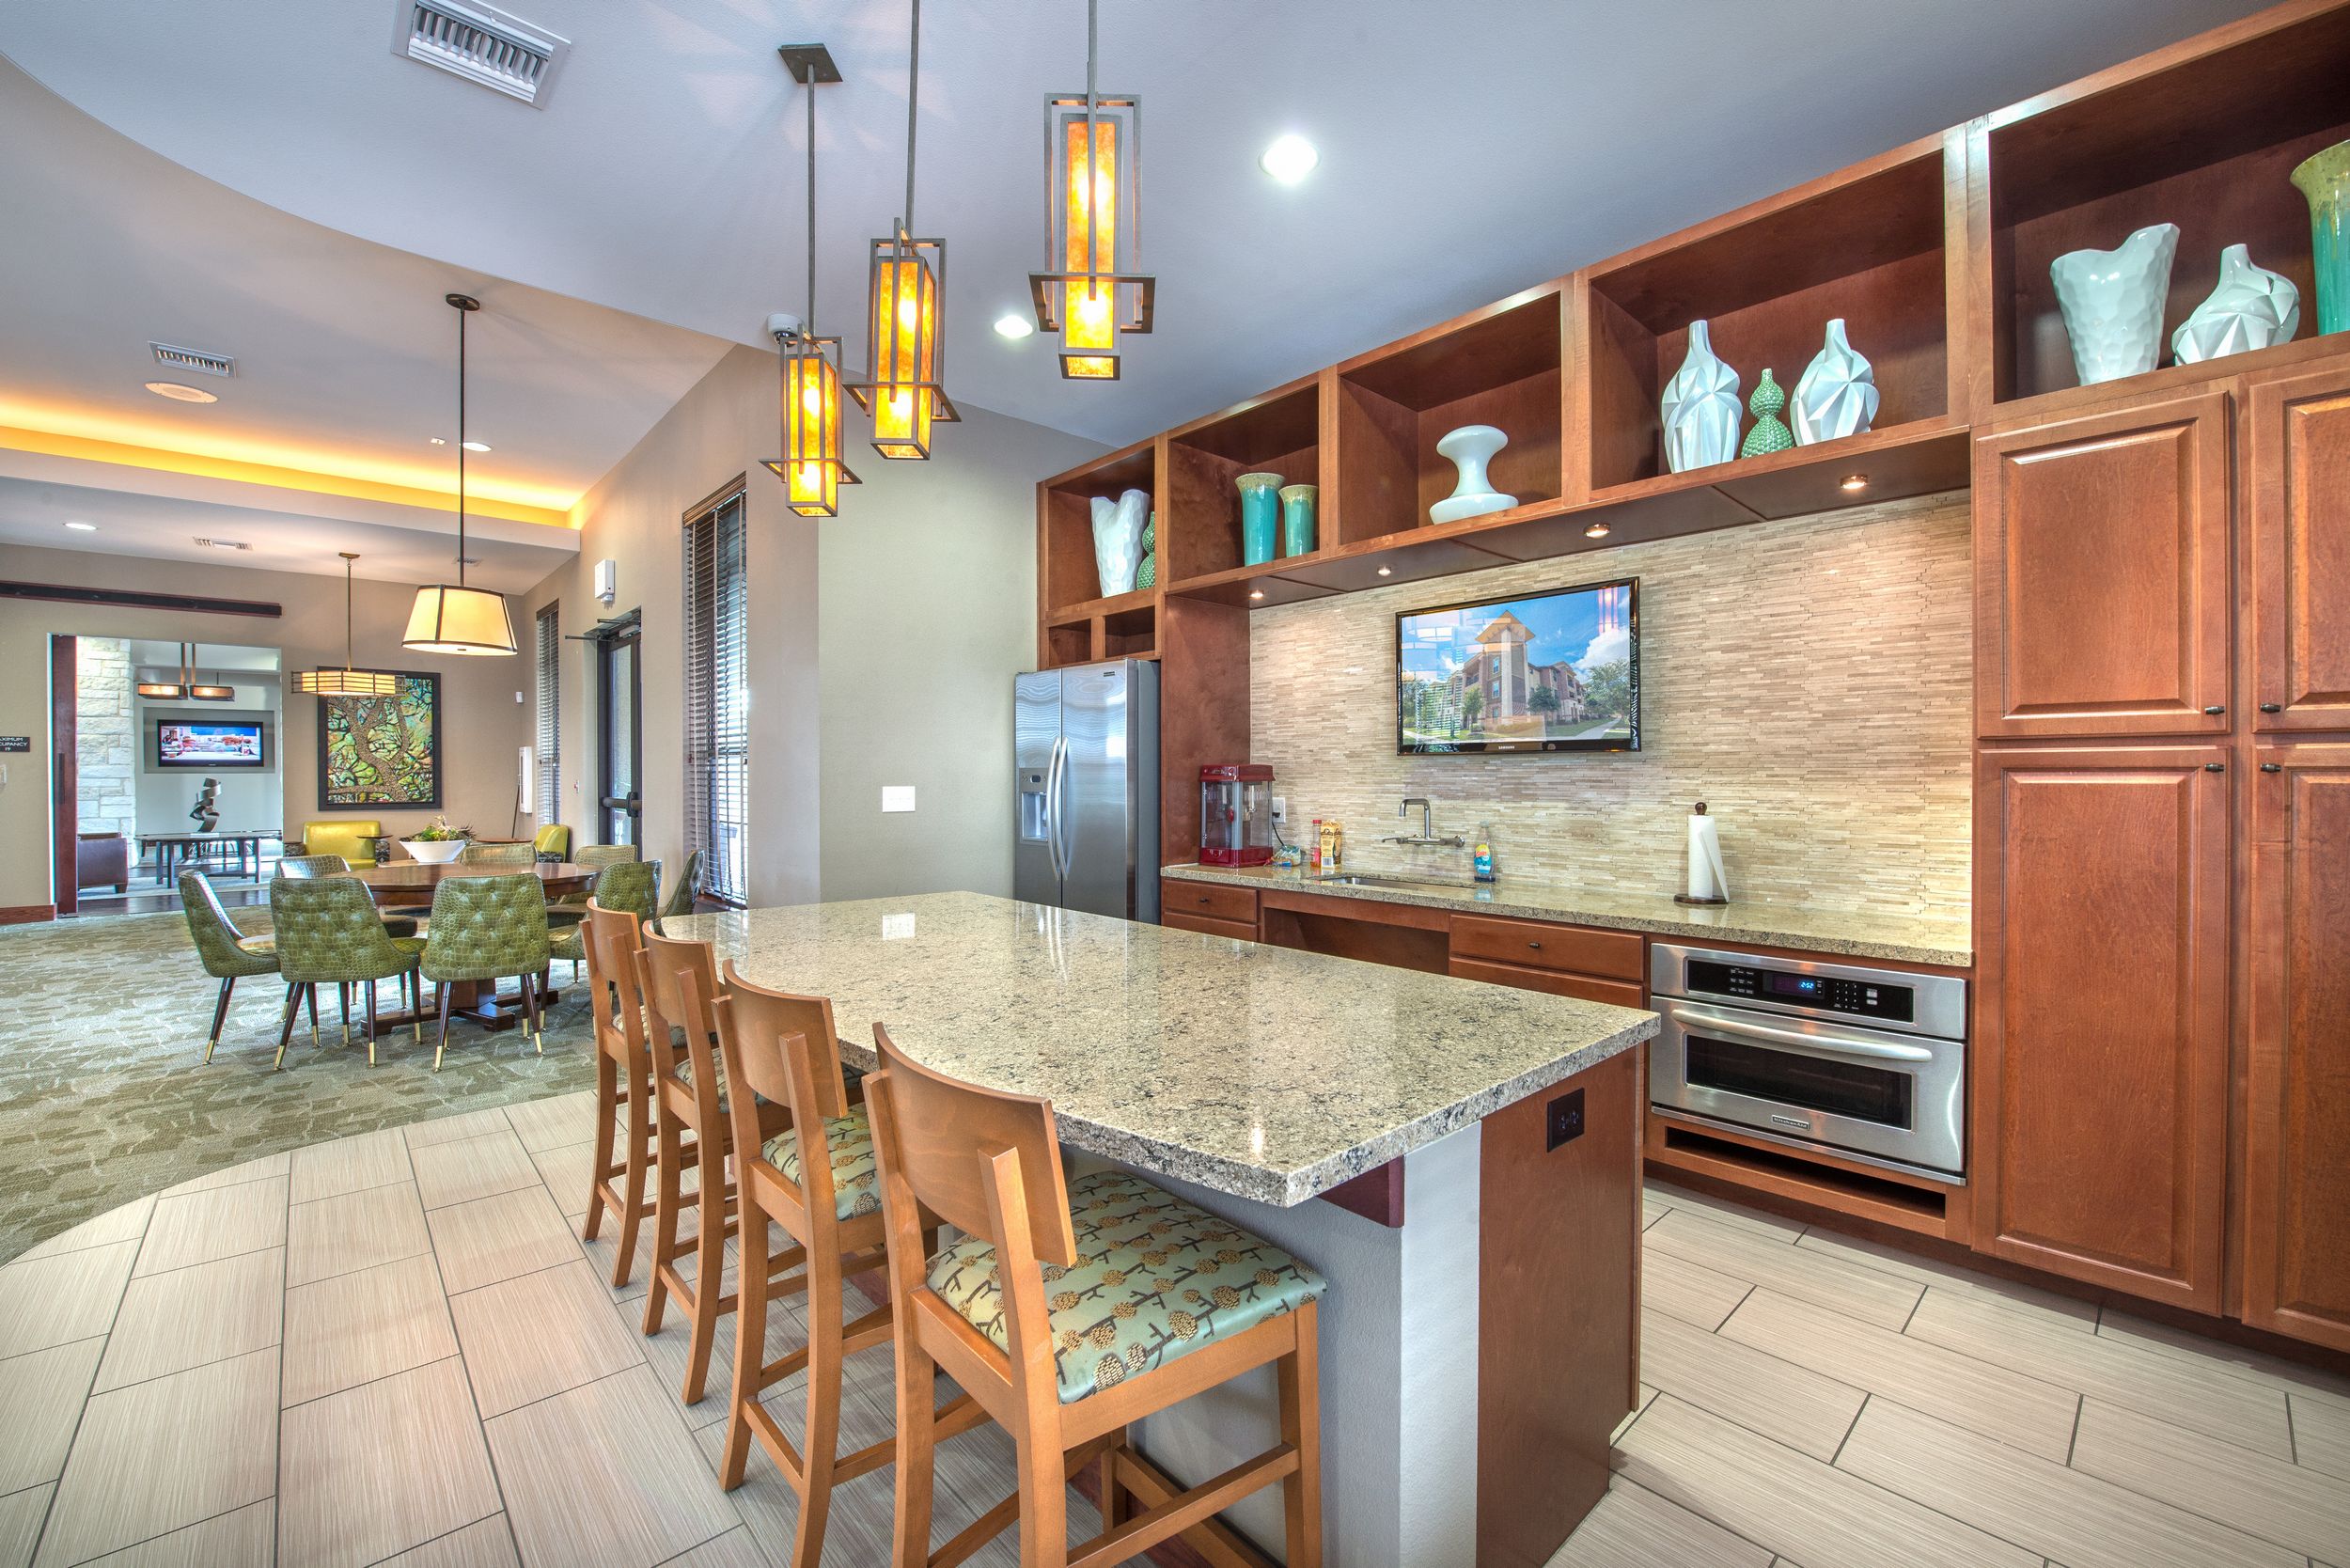 Community kitchen with stainless steel appliances and island with seating at Lantower Residences at the Collection